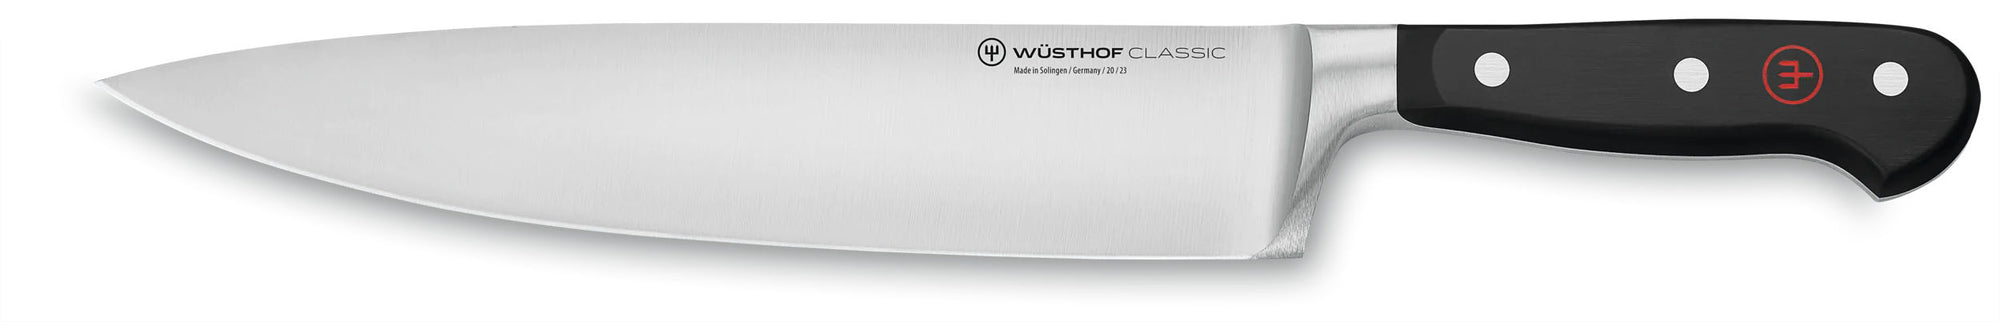 Wusthof Classic Cook's Knife, 9-inch (23 cm) - 4582-23